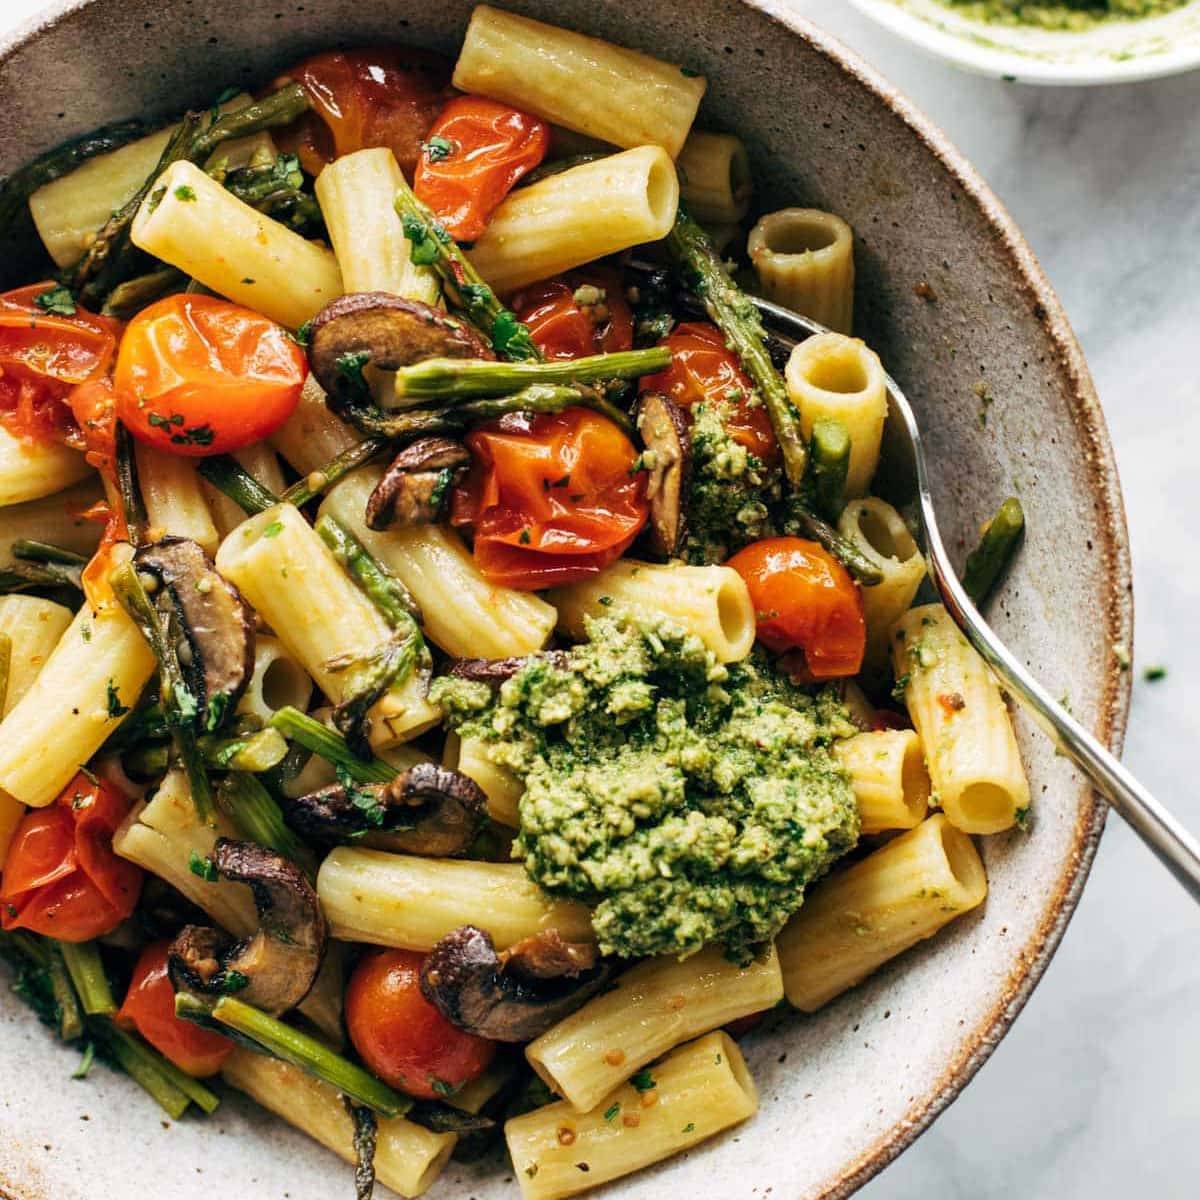 Rigatoni noodles with roasted veggies and pesto sauce.